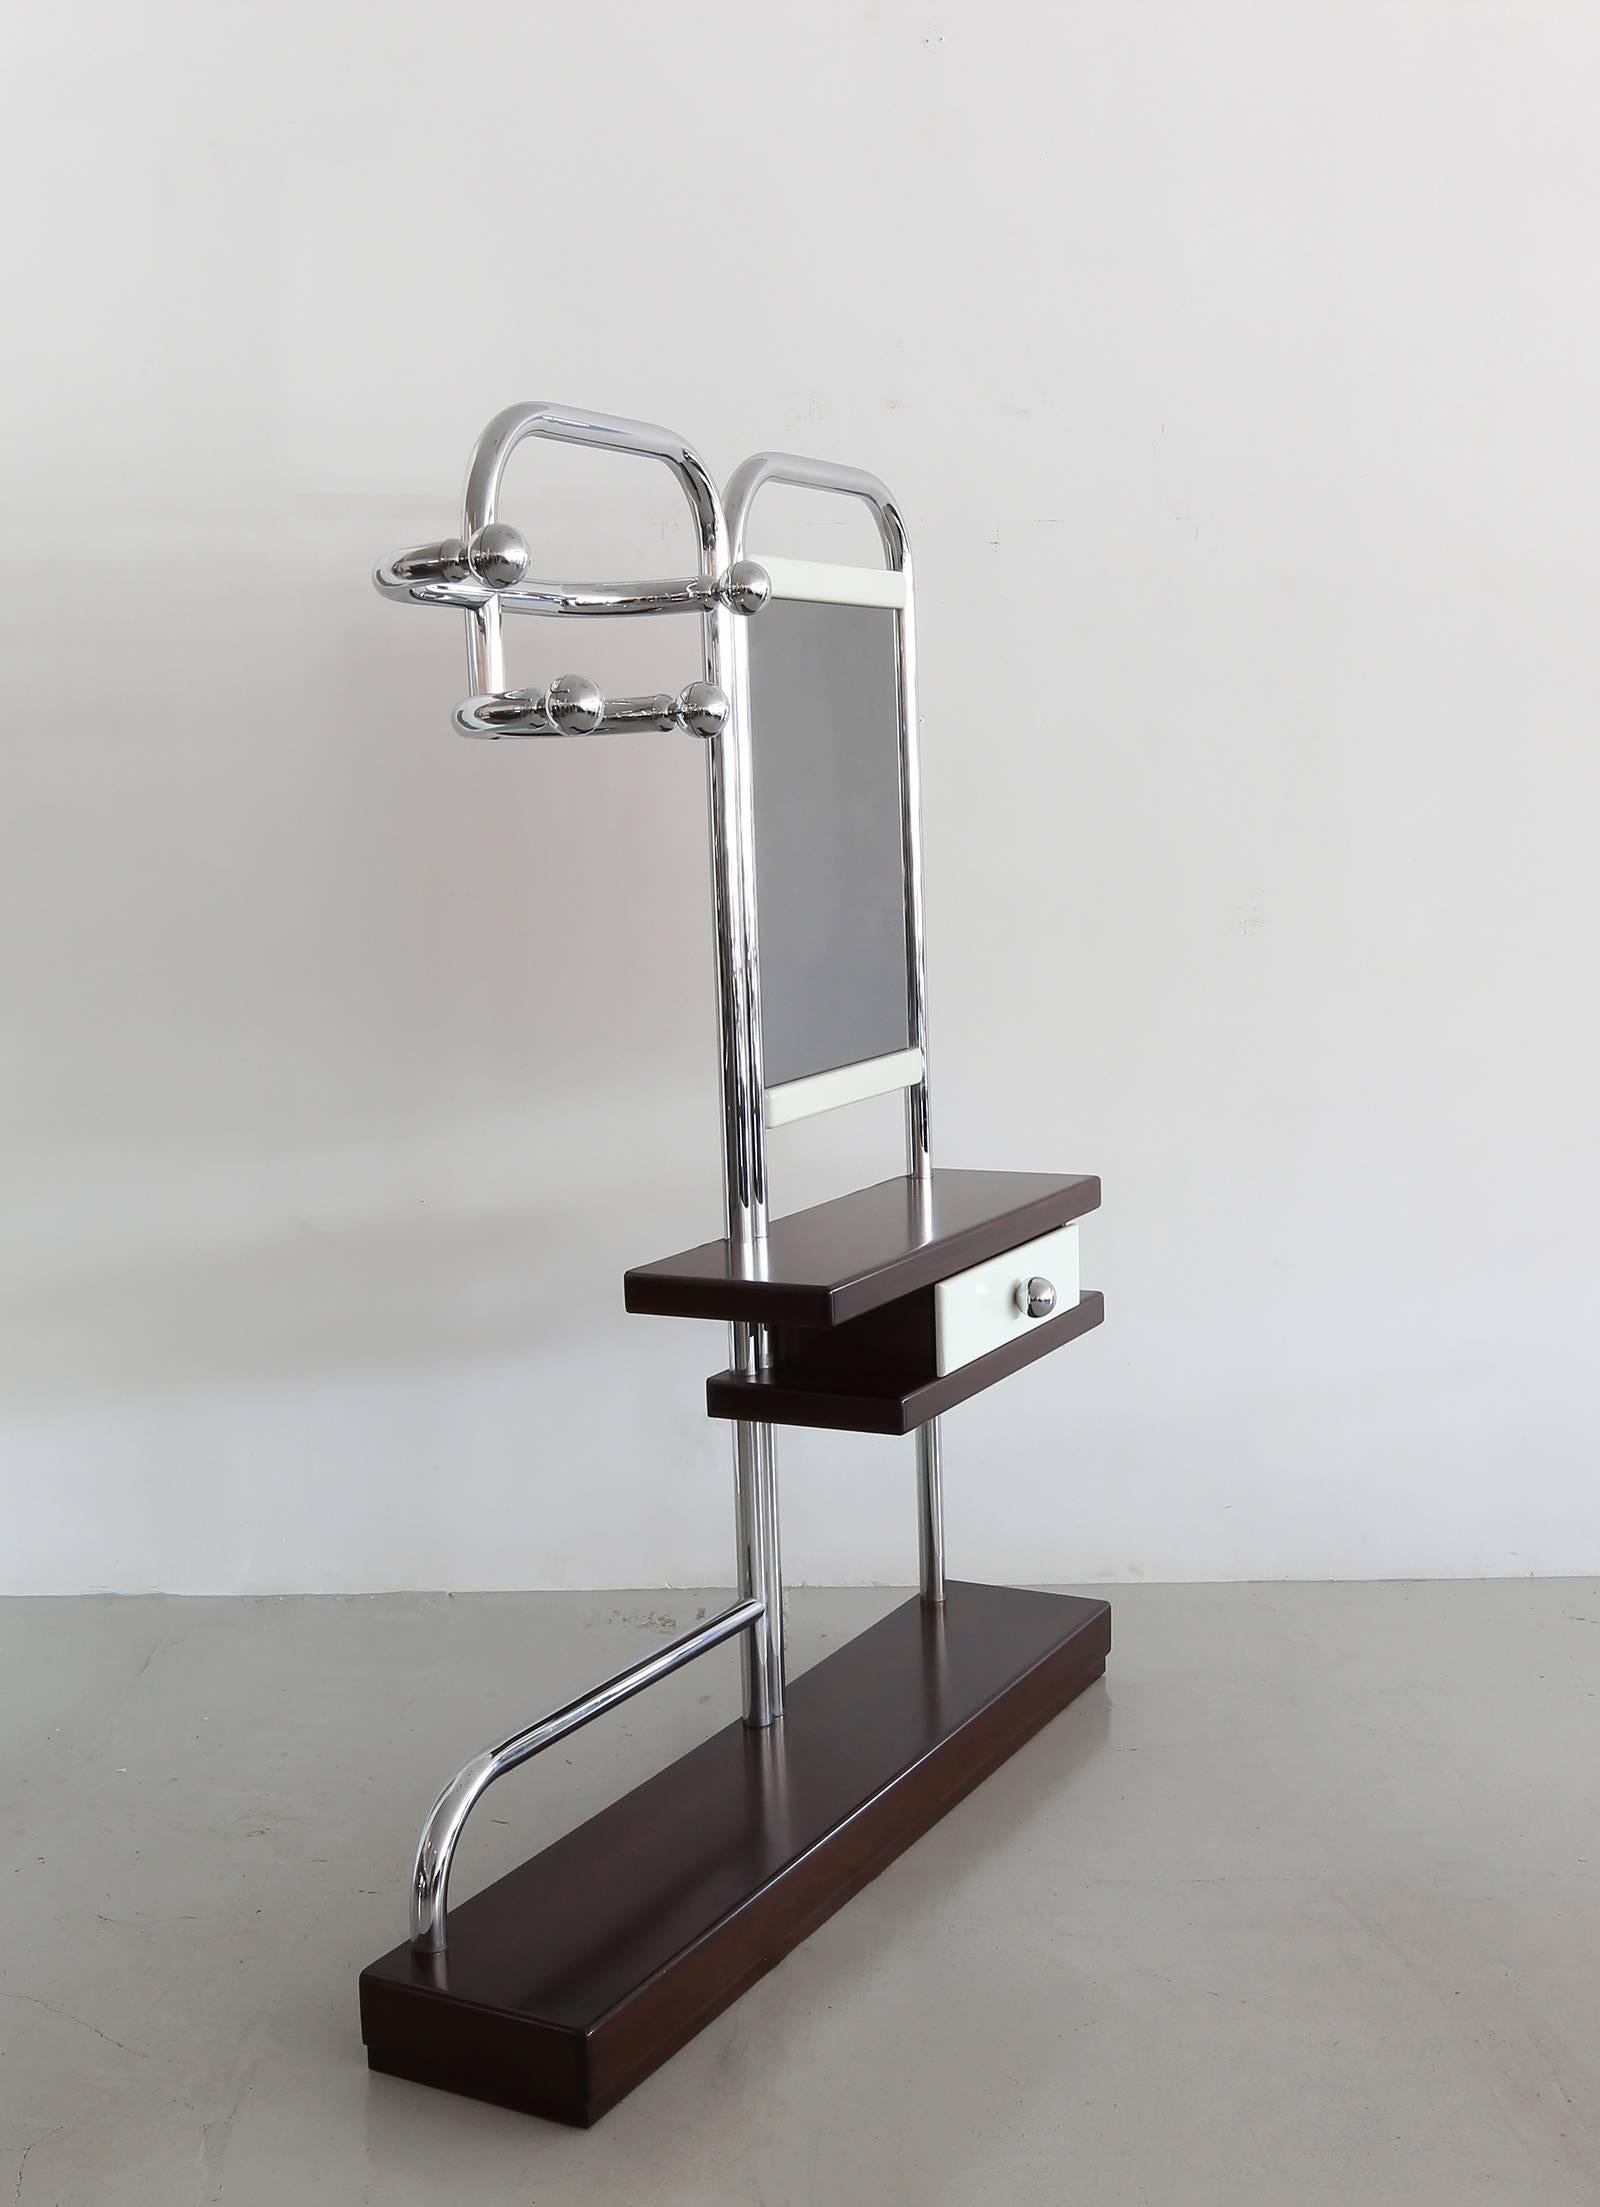 Unique vintage hall tree or valet with oversized tubular chrome frame in a Bauhaus style. Features a four hook coat rack and slightly tinted mirror. Handsome wood base and drawer with large chrome ball drawer pull to match the ball coat hooks. This